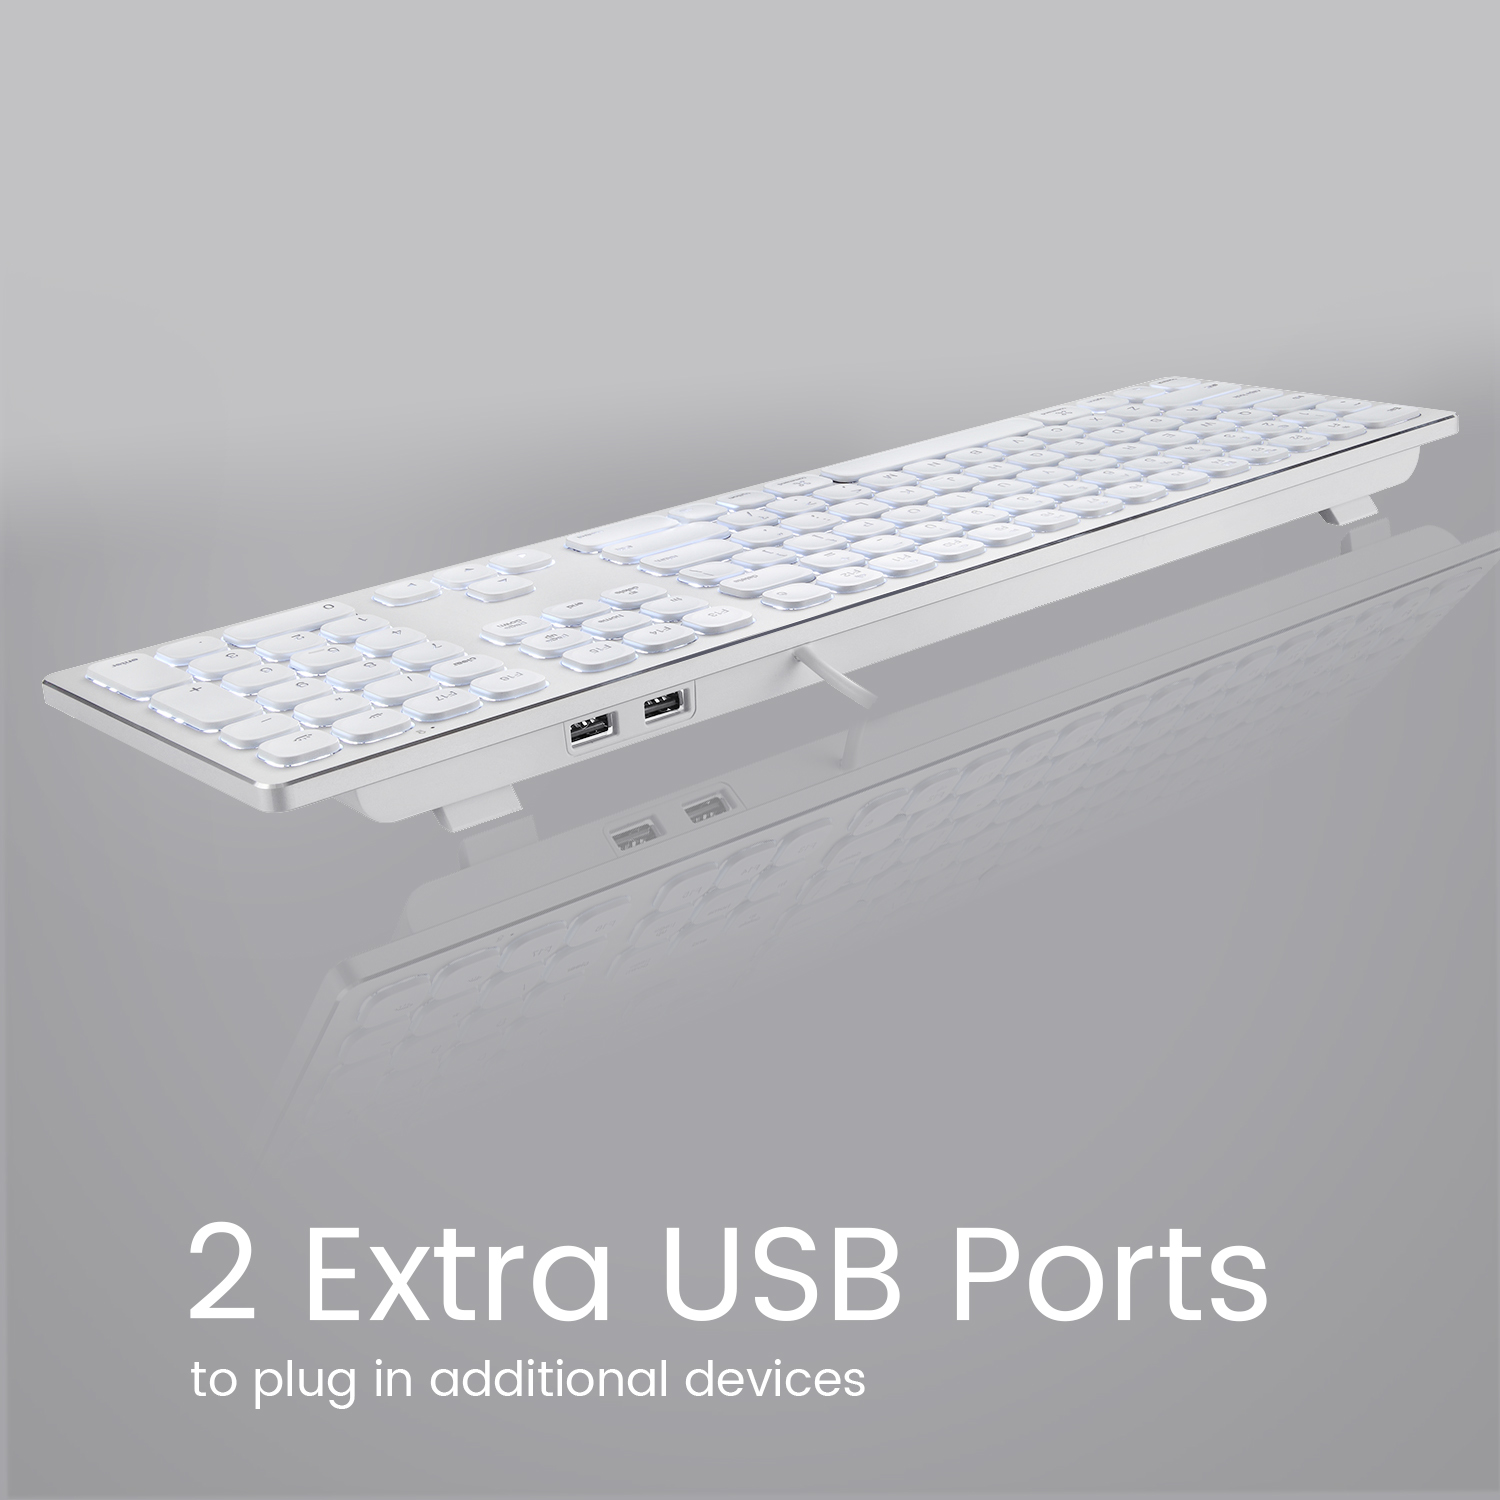 More USB ports for your devices